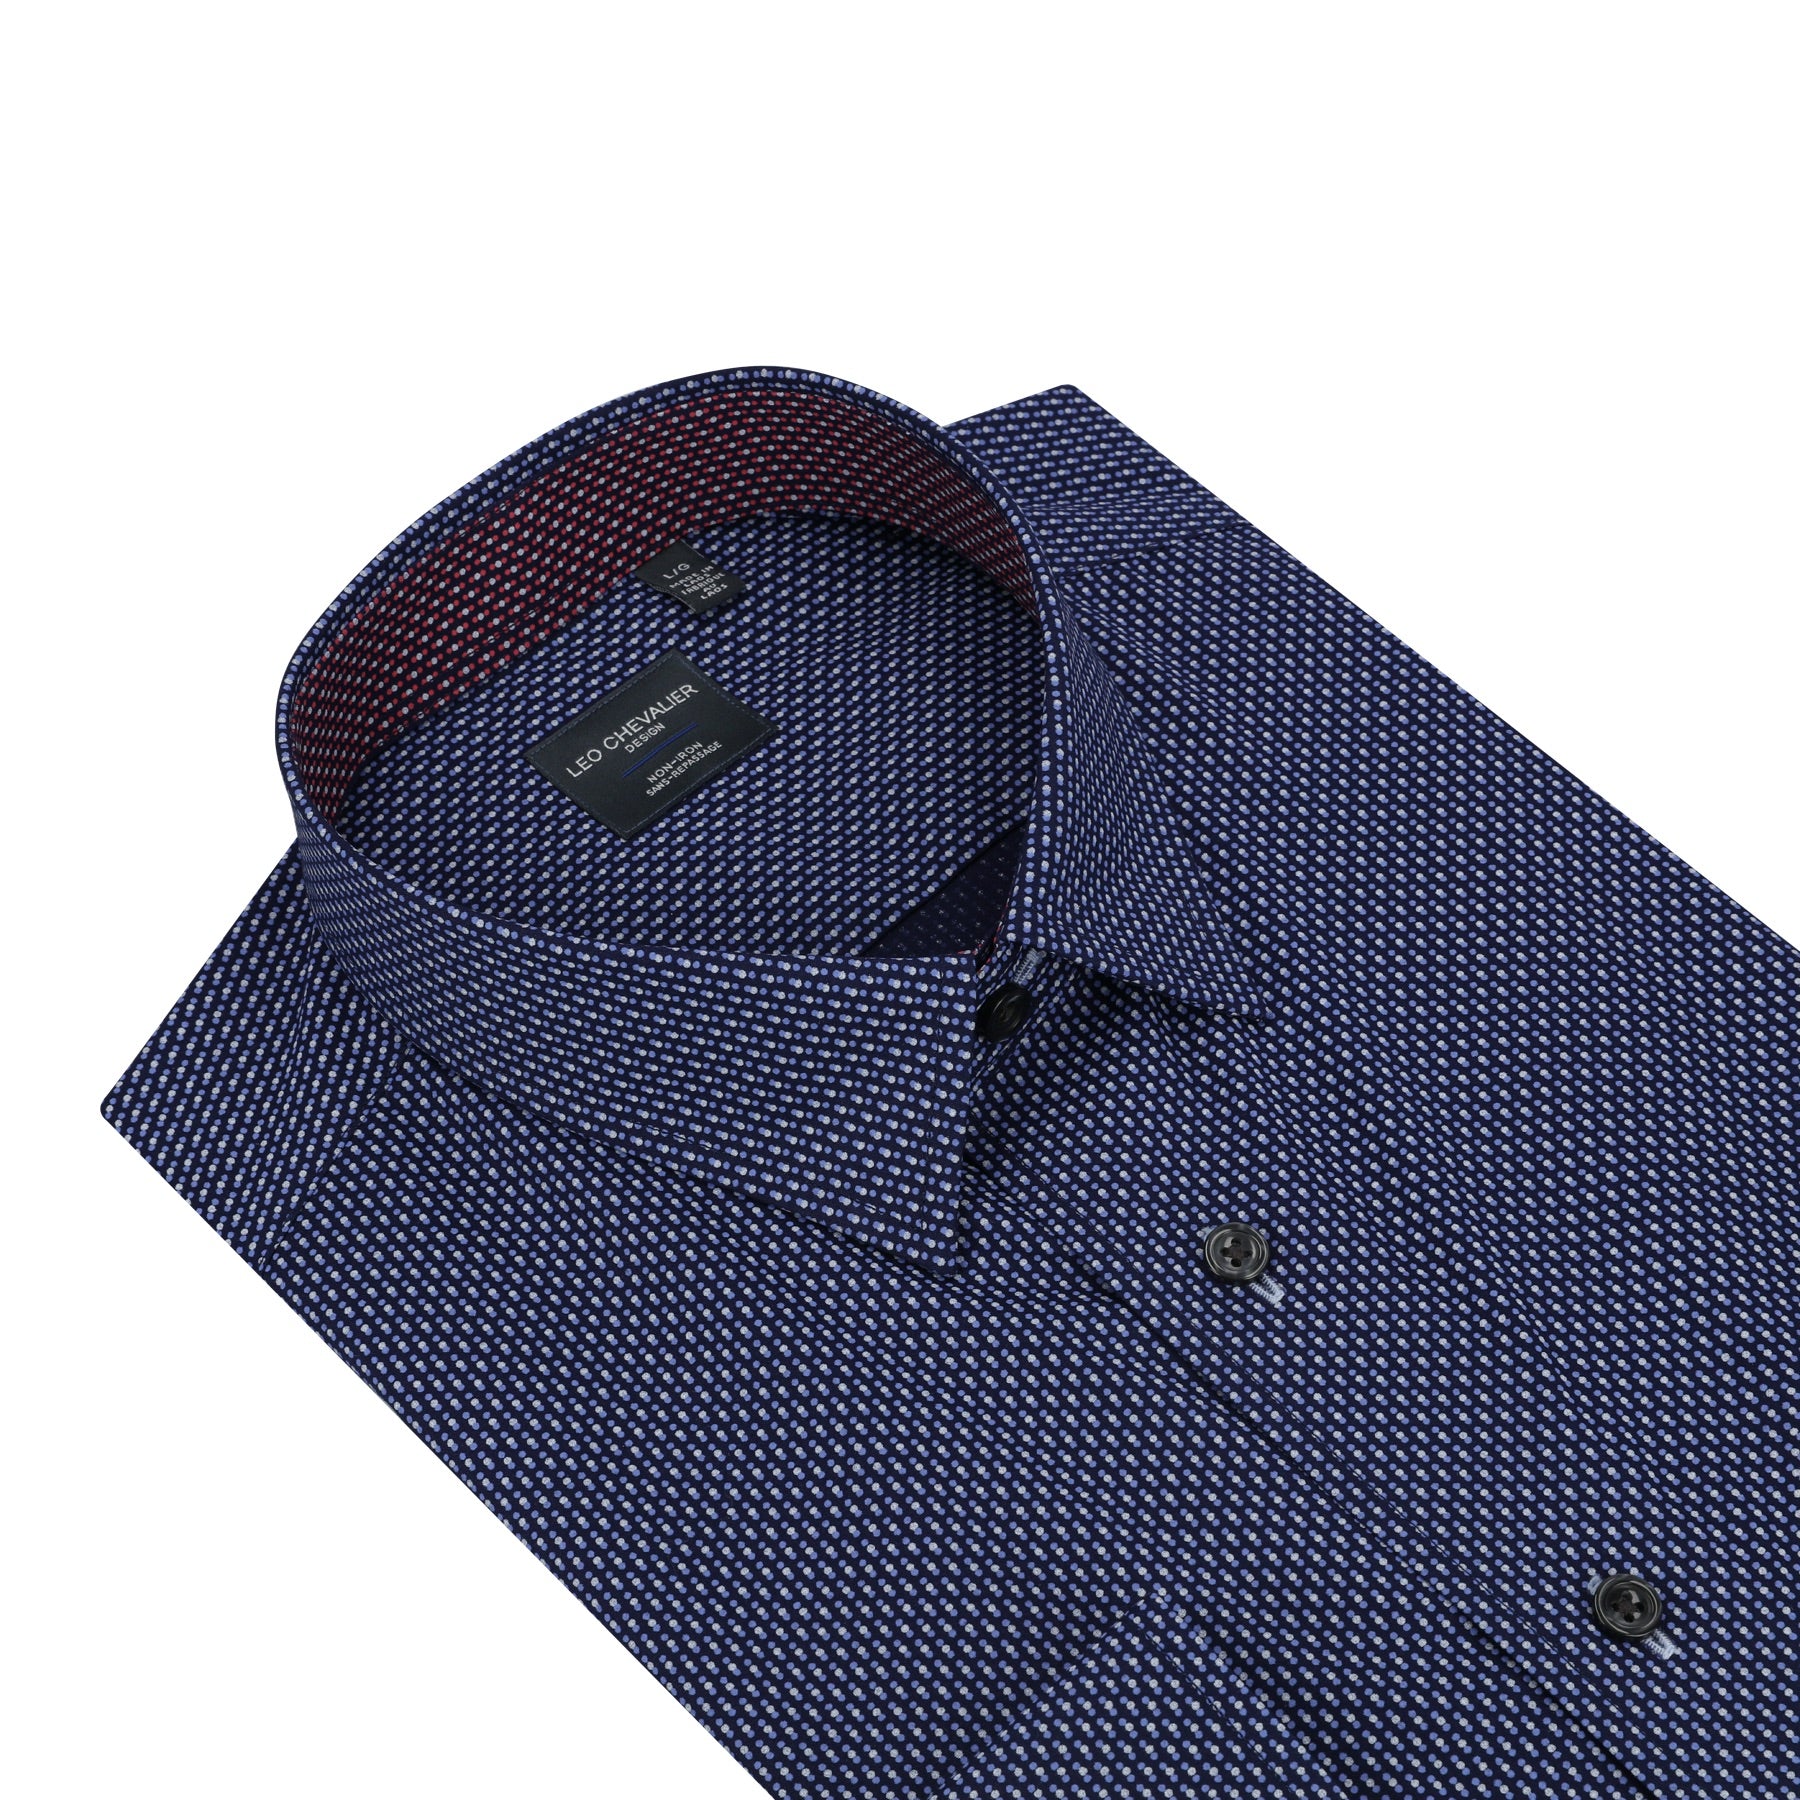 Navy and Light Blue Dot Print No-Iron Cotton Sport Shirt with Hidden Button Down Collar by Leo Chevalier